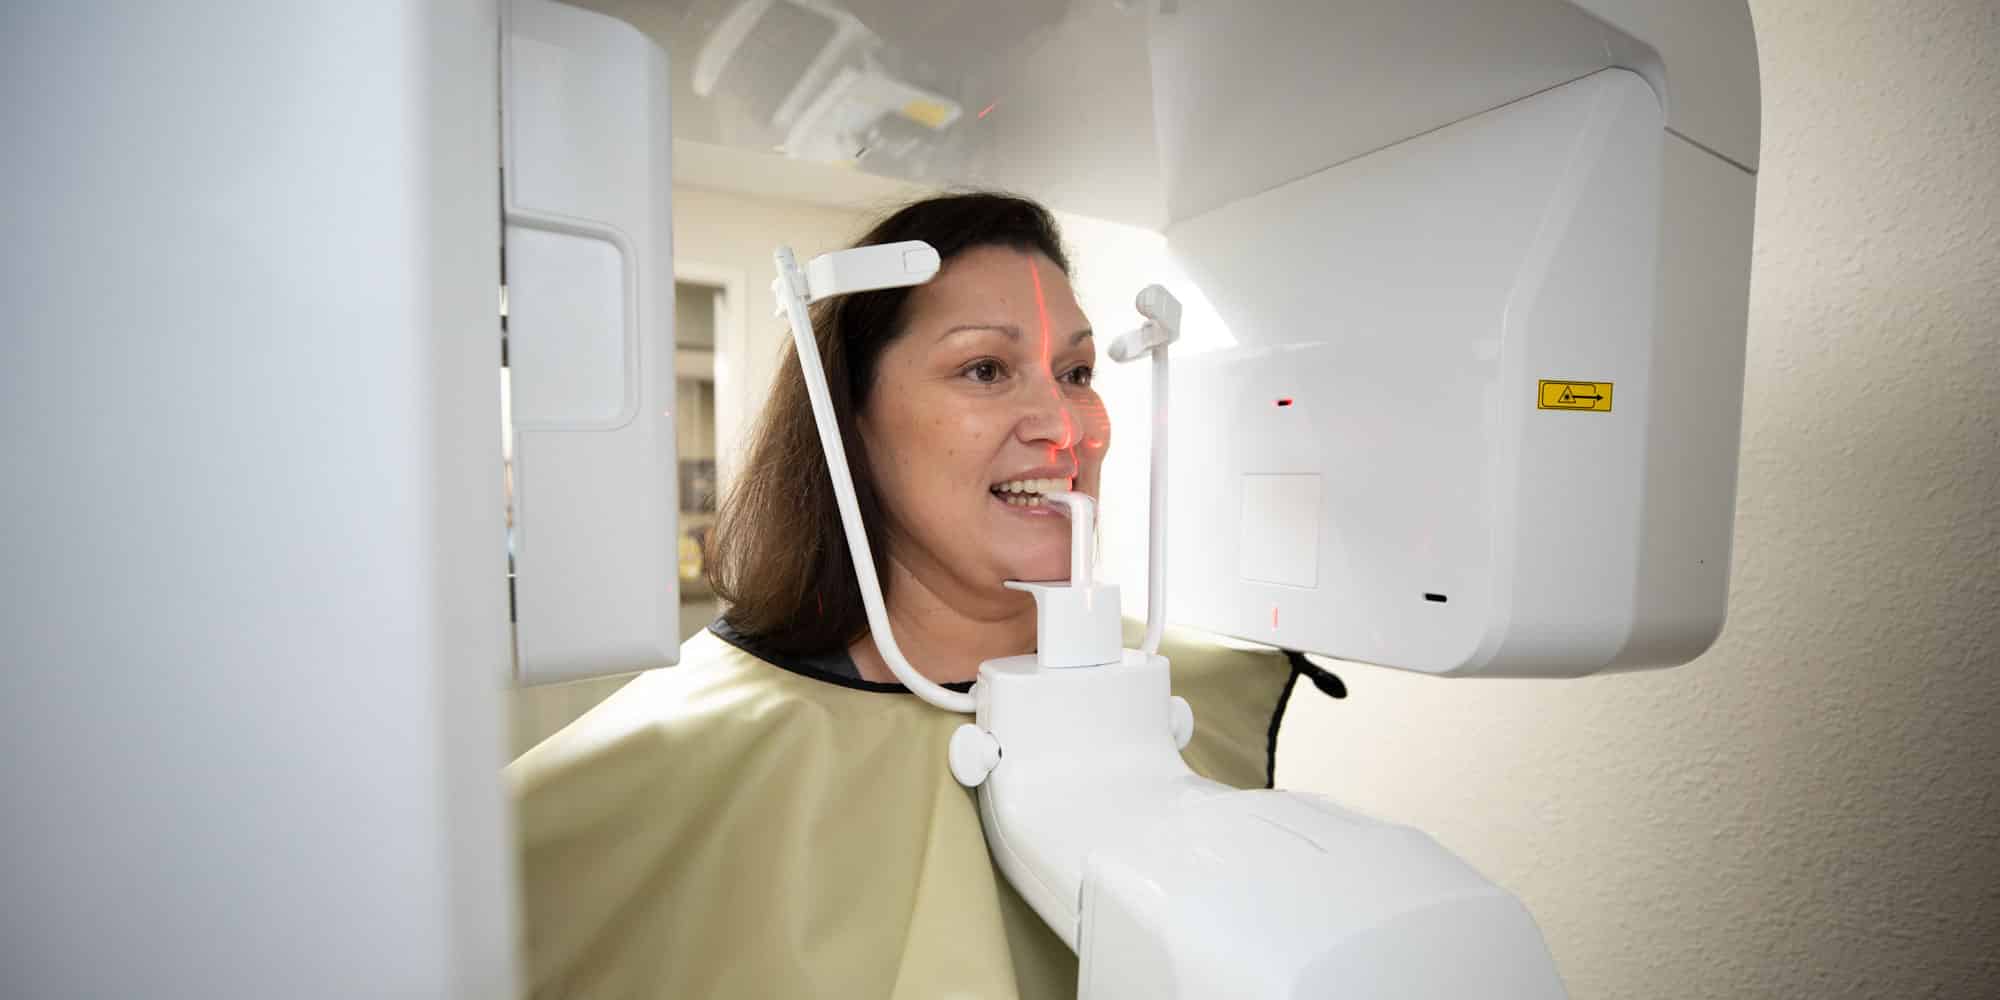 tina in cbct scanner for digital scan